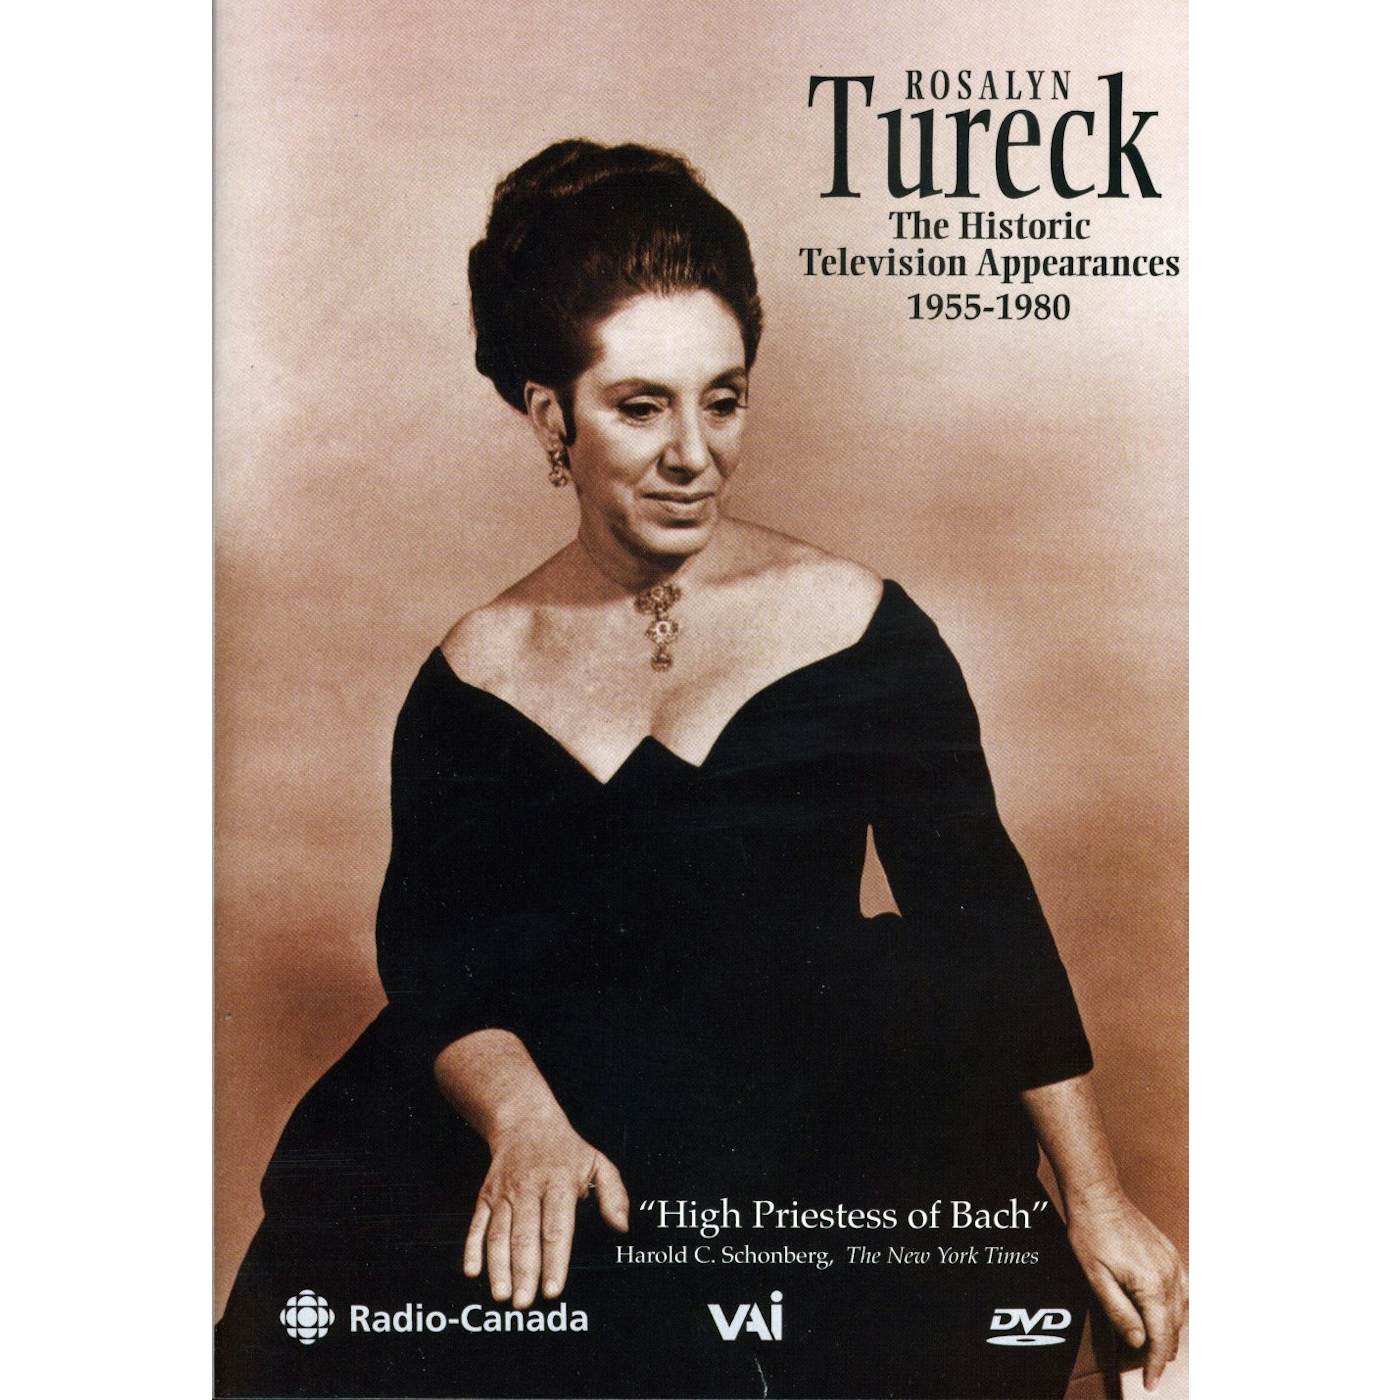 ROSALYN TURECK: THE HISTORIC TELEVISION BROADCASTS DVD